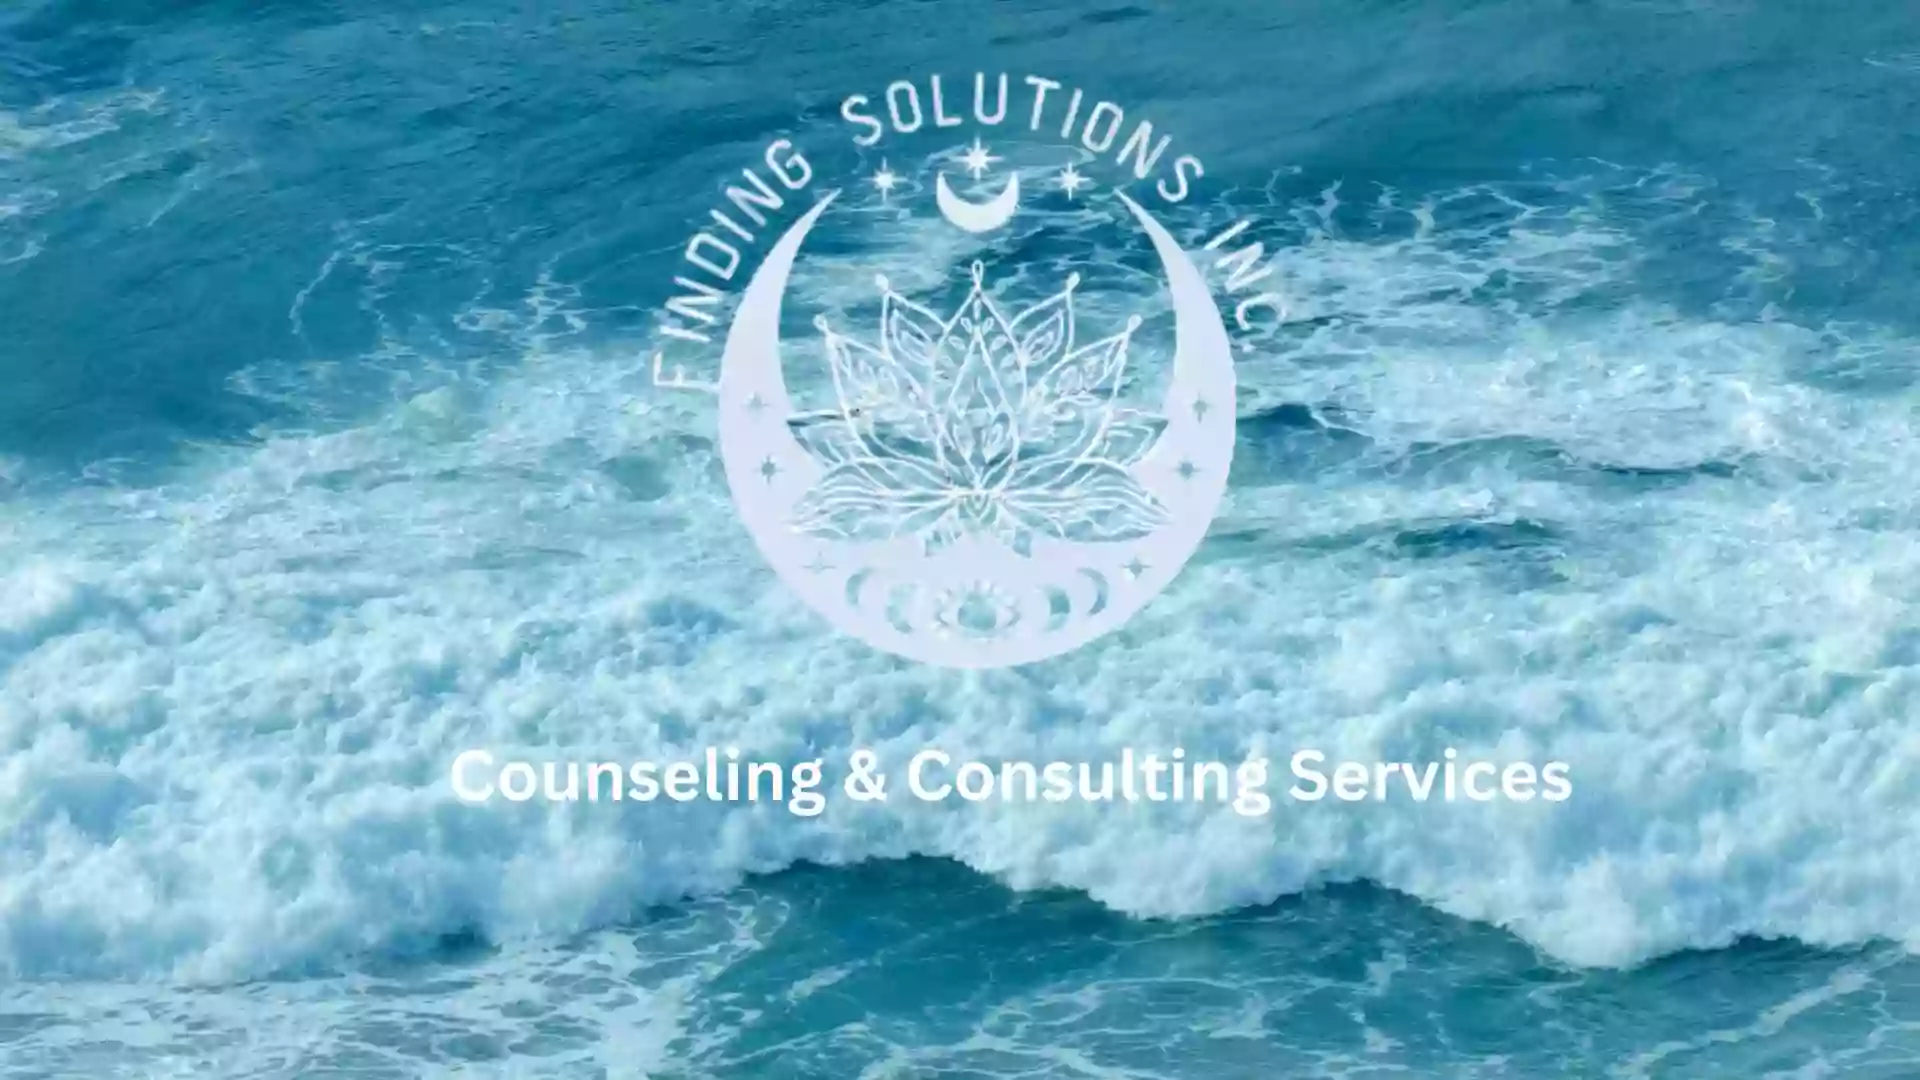 Finding Solutions, Inc